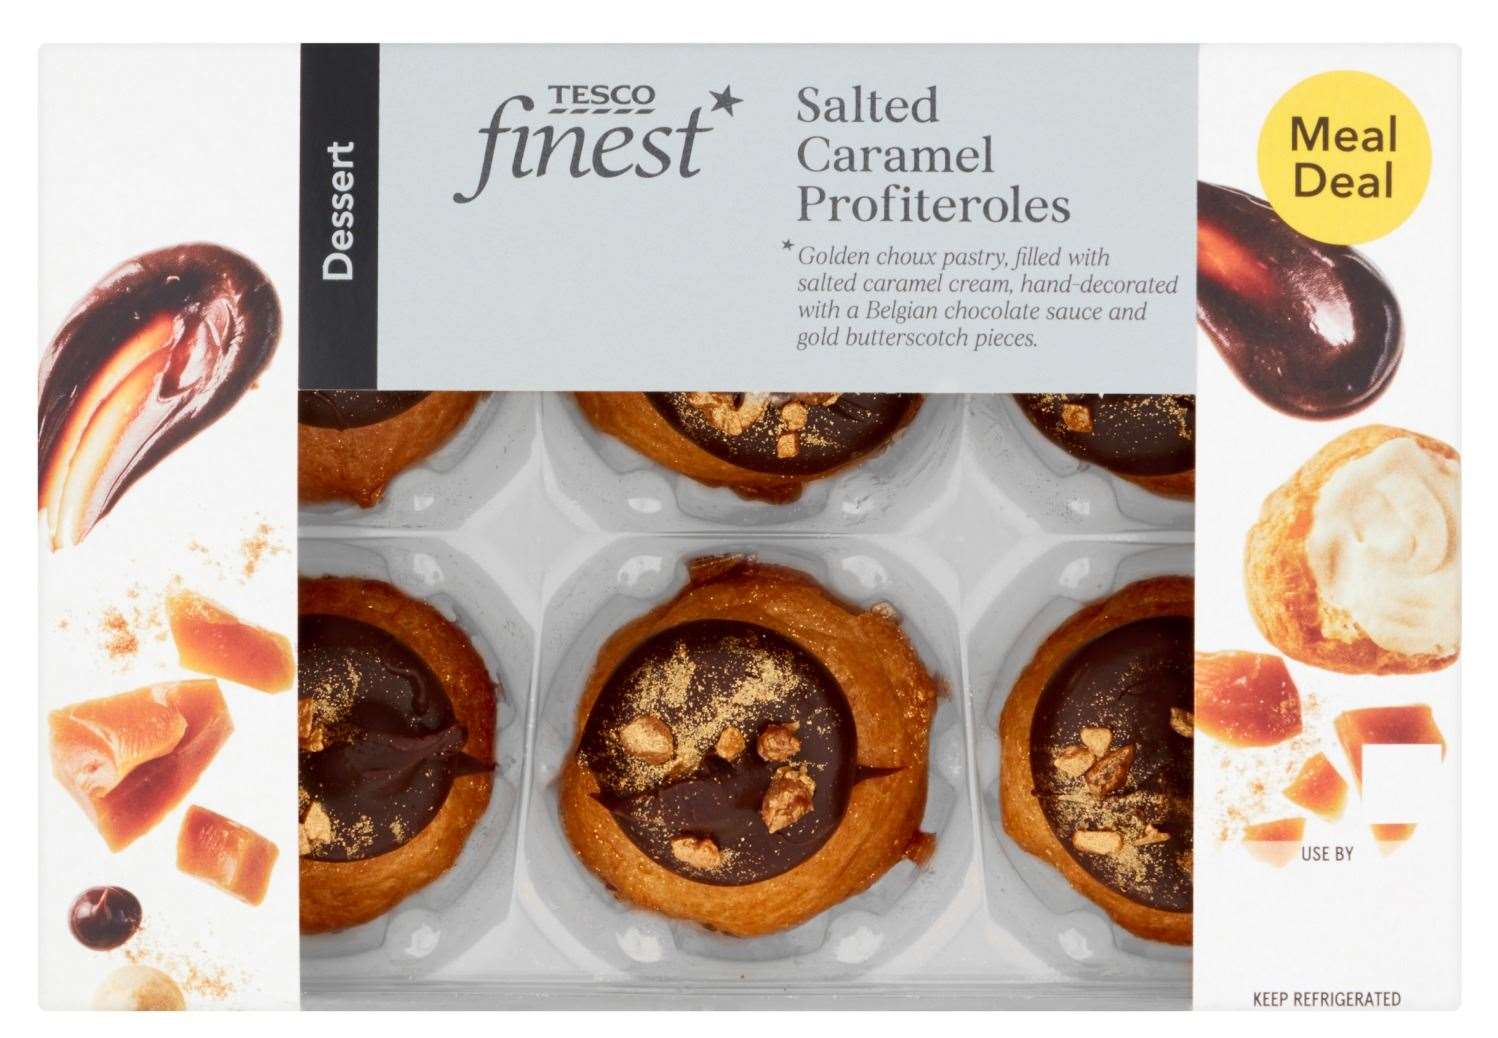 Tesco Finest Salted Caramel Profiteroles are among the dessert choices. Photo: Tesco.